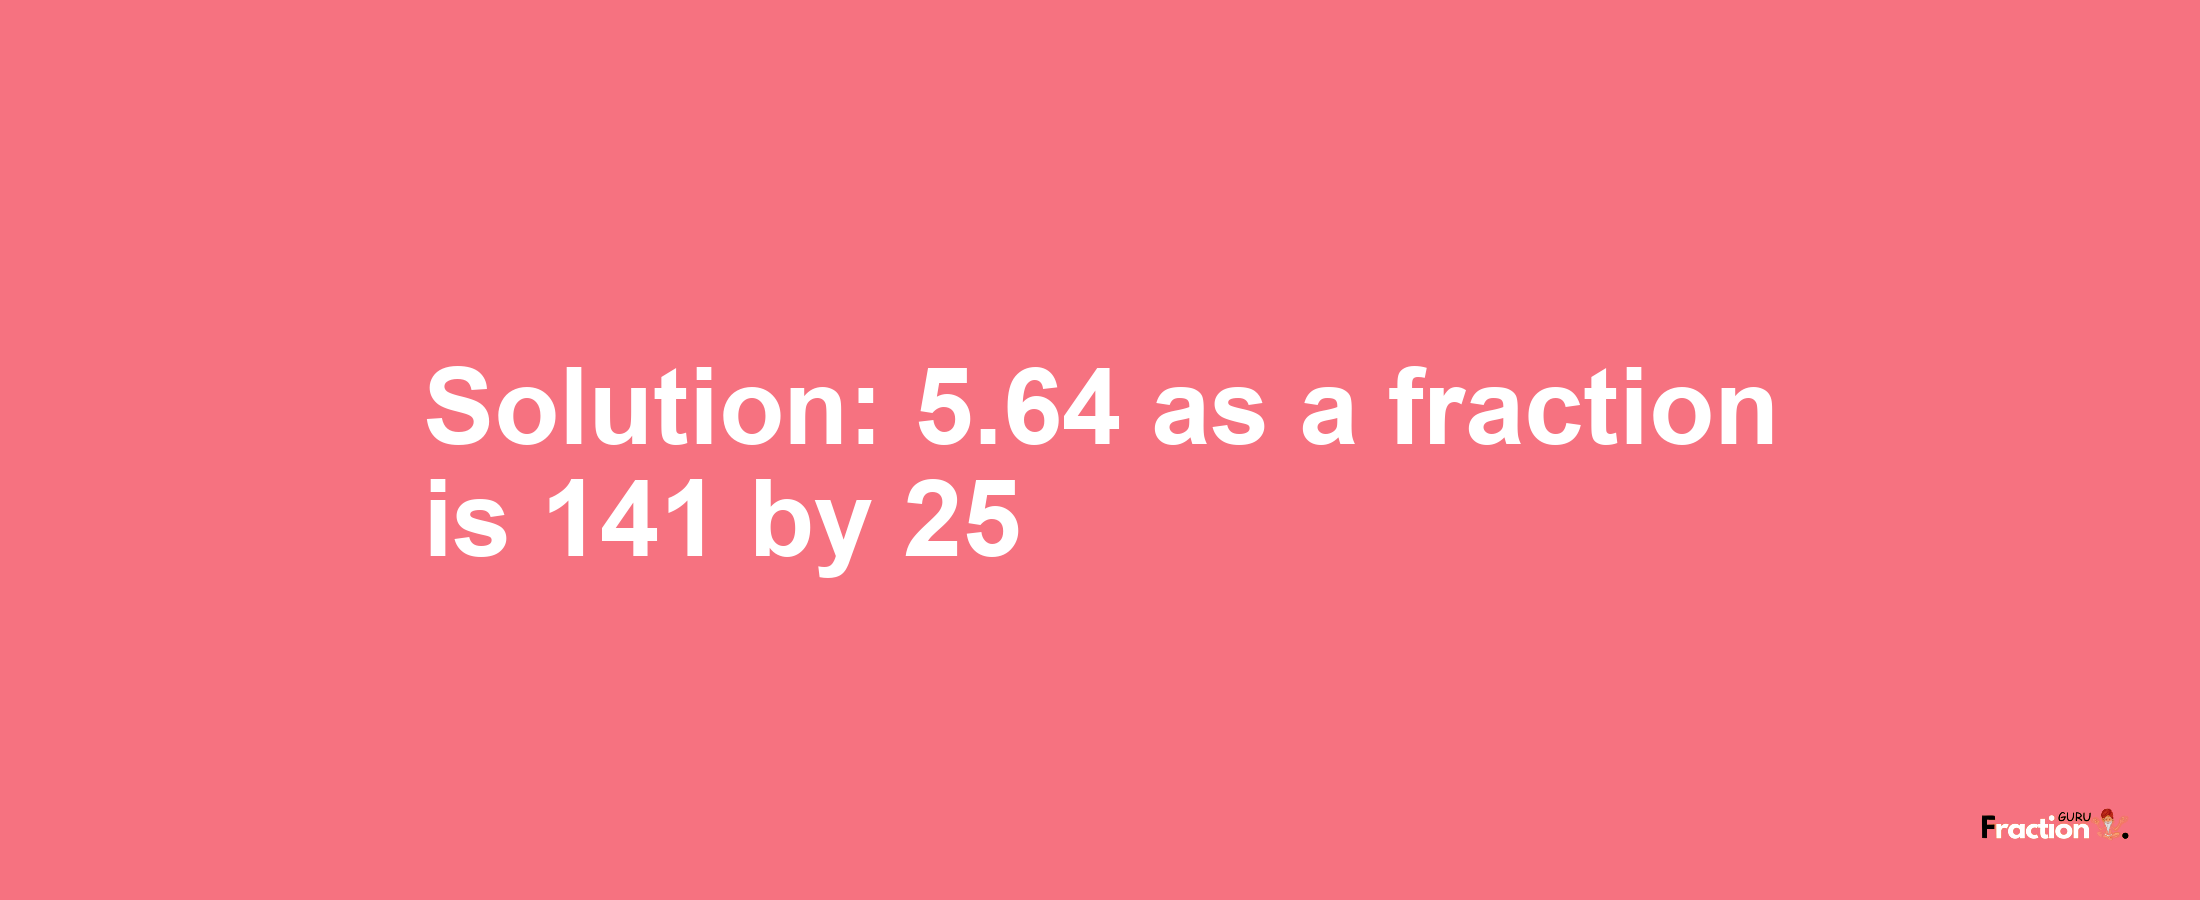 Solution:5.64 as a fraction is 141/25